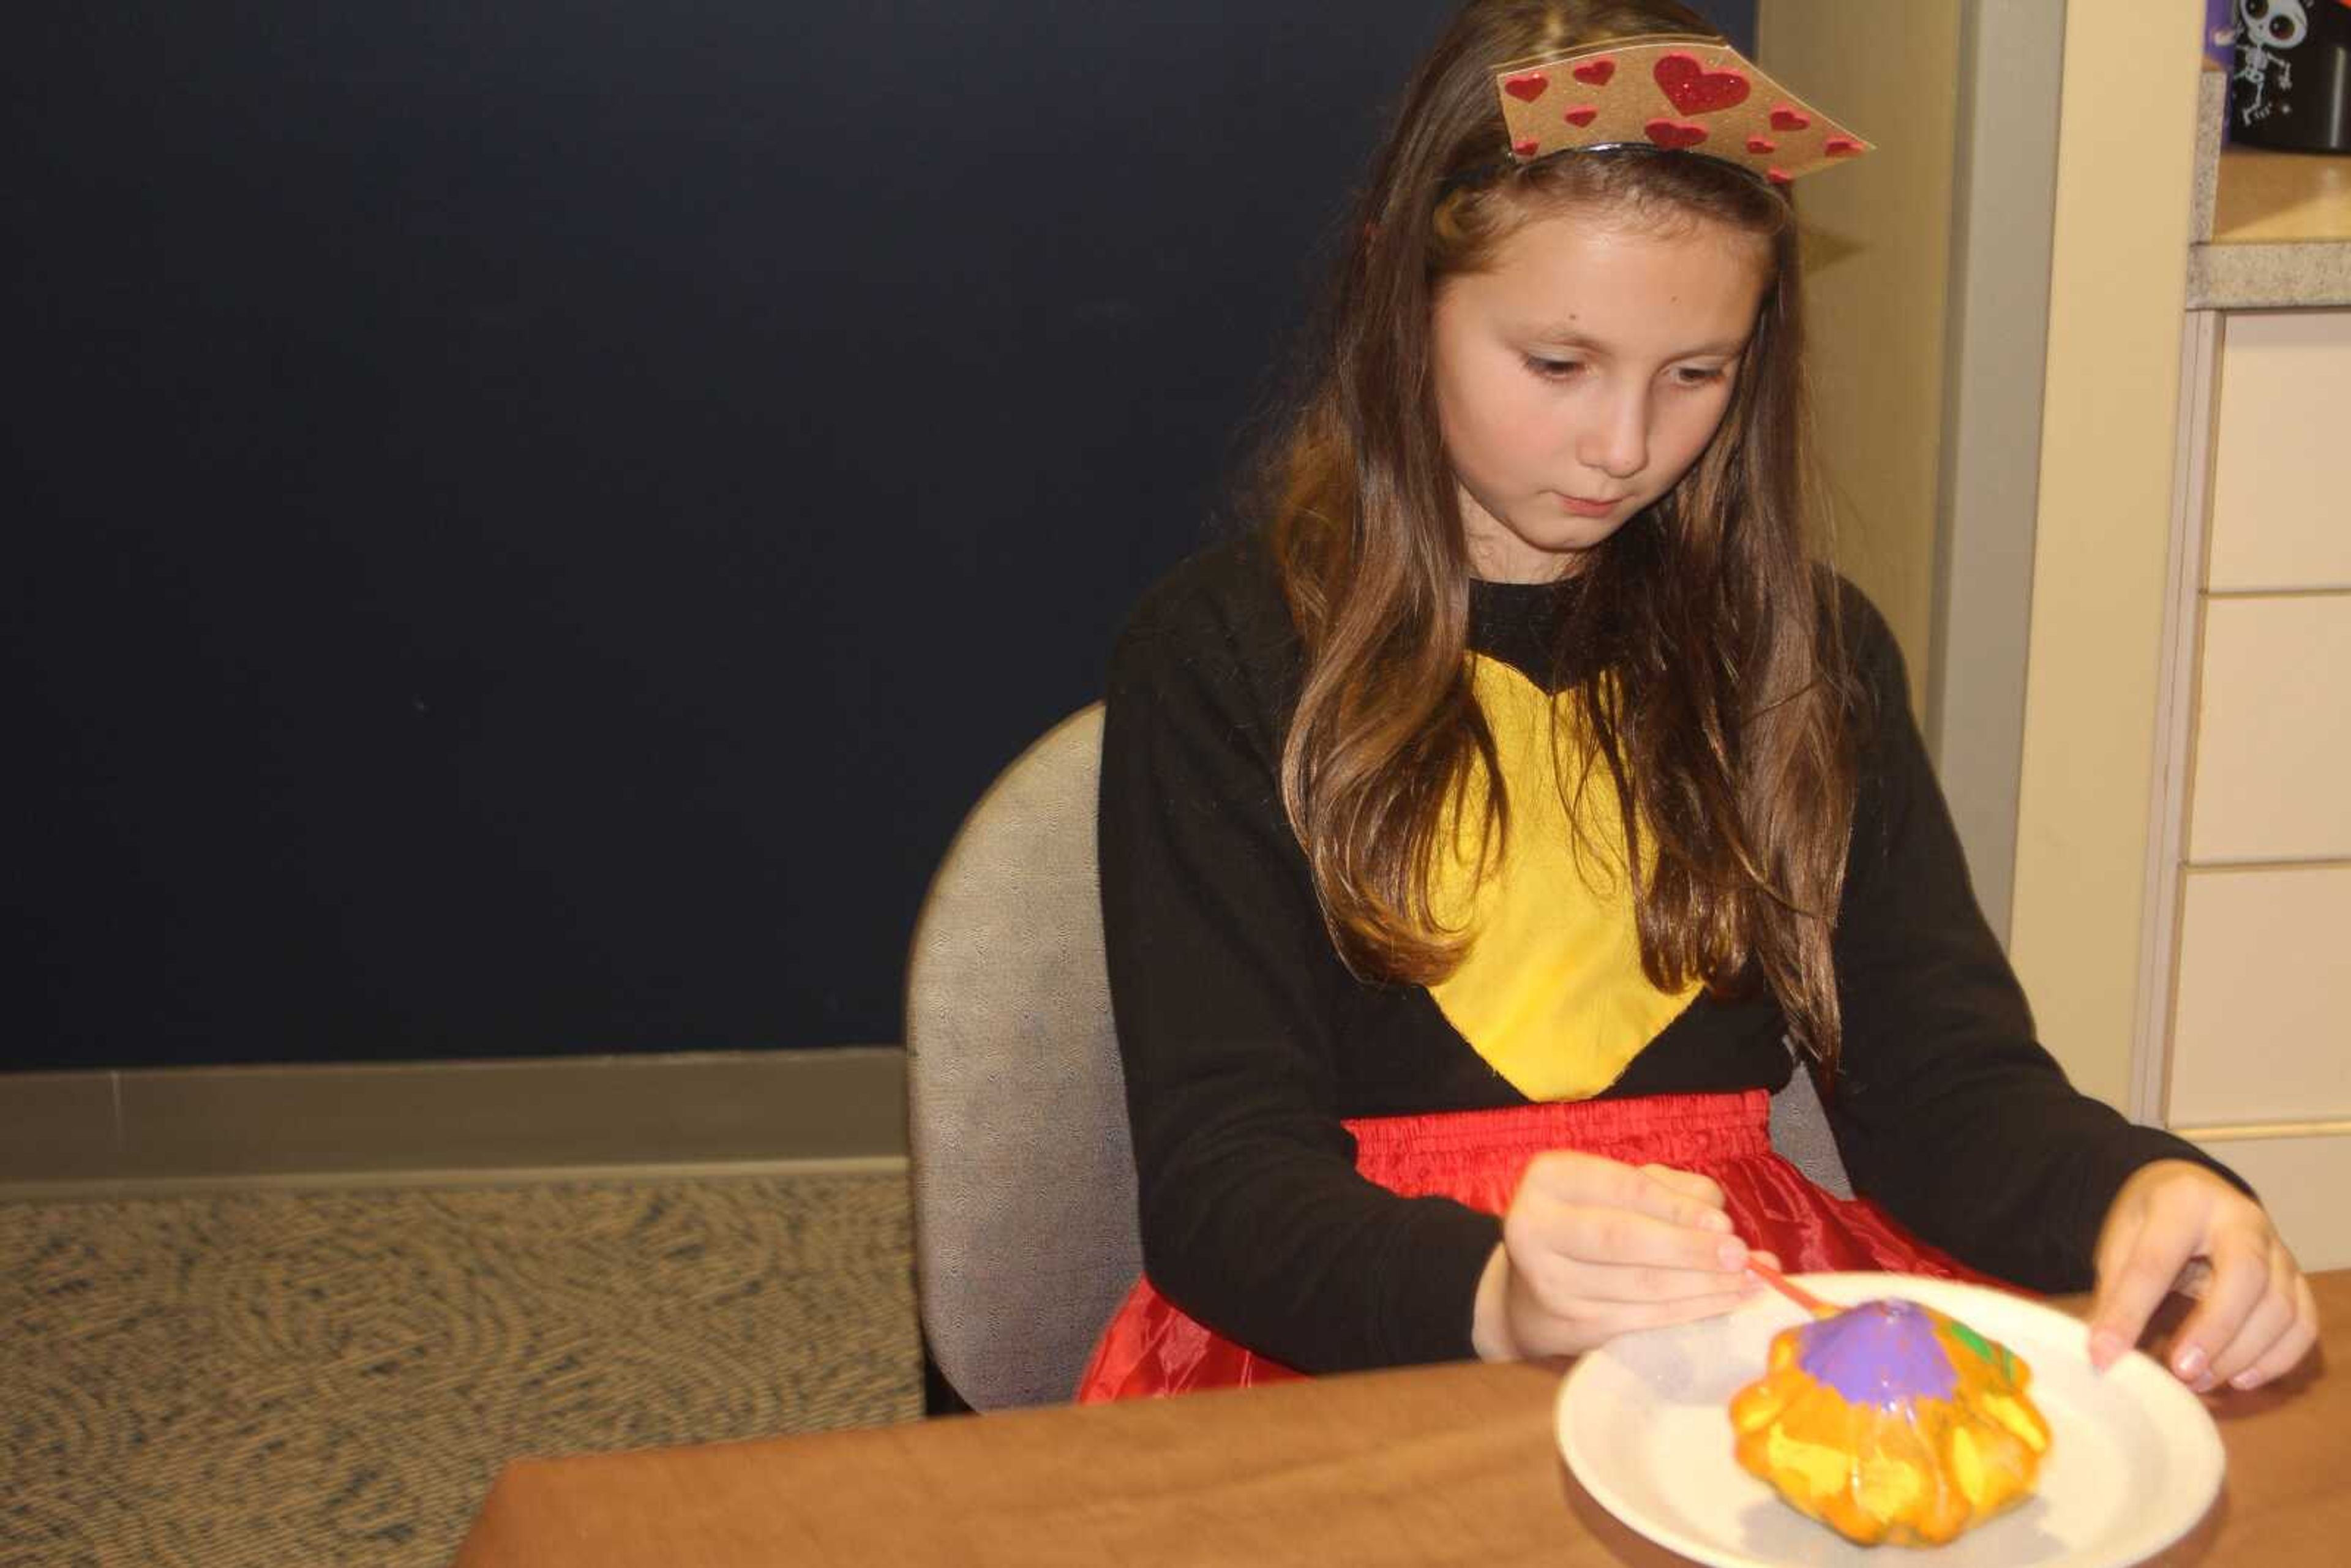 Vandiver Hall hostesses a safe trick or treat on Oct. 28th that features various activities including pumpkin painting.